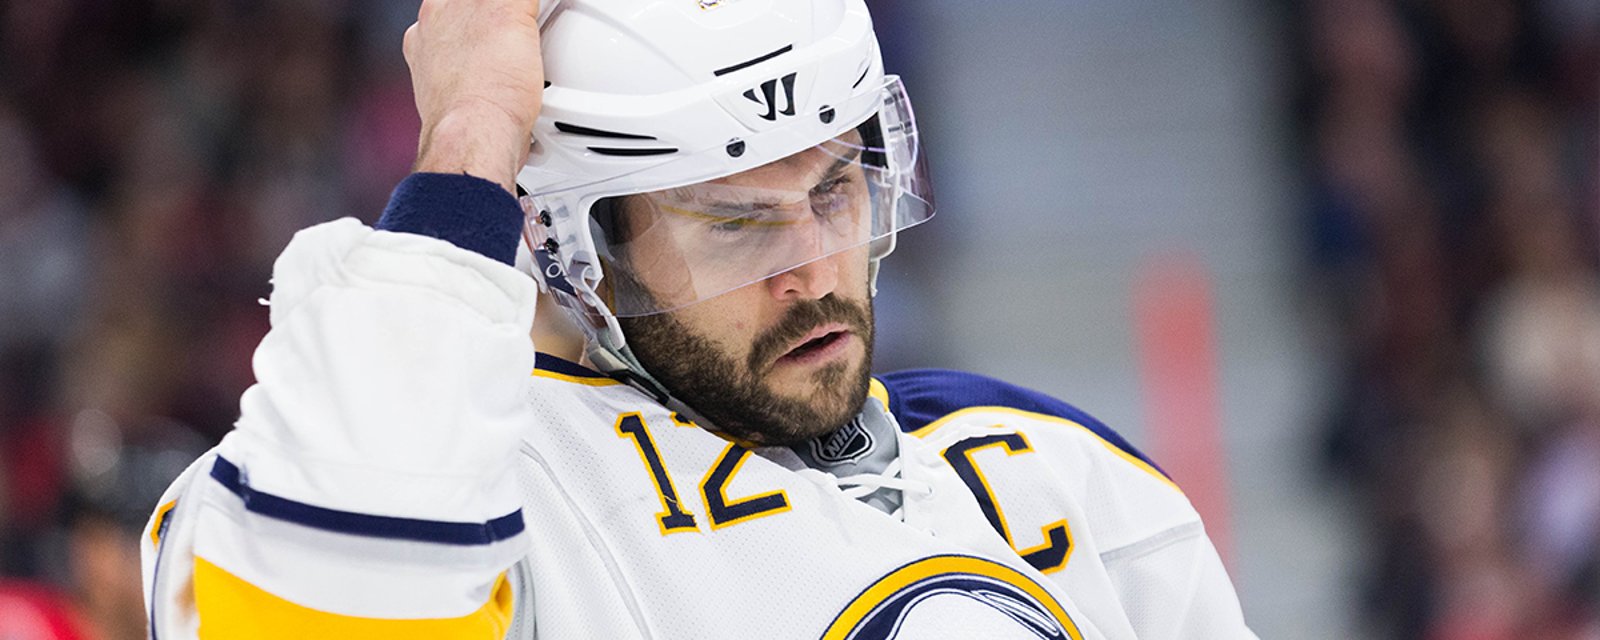 Rumor: Former Sabres captain Gionta confirms Olympic plans